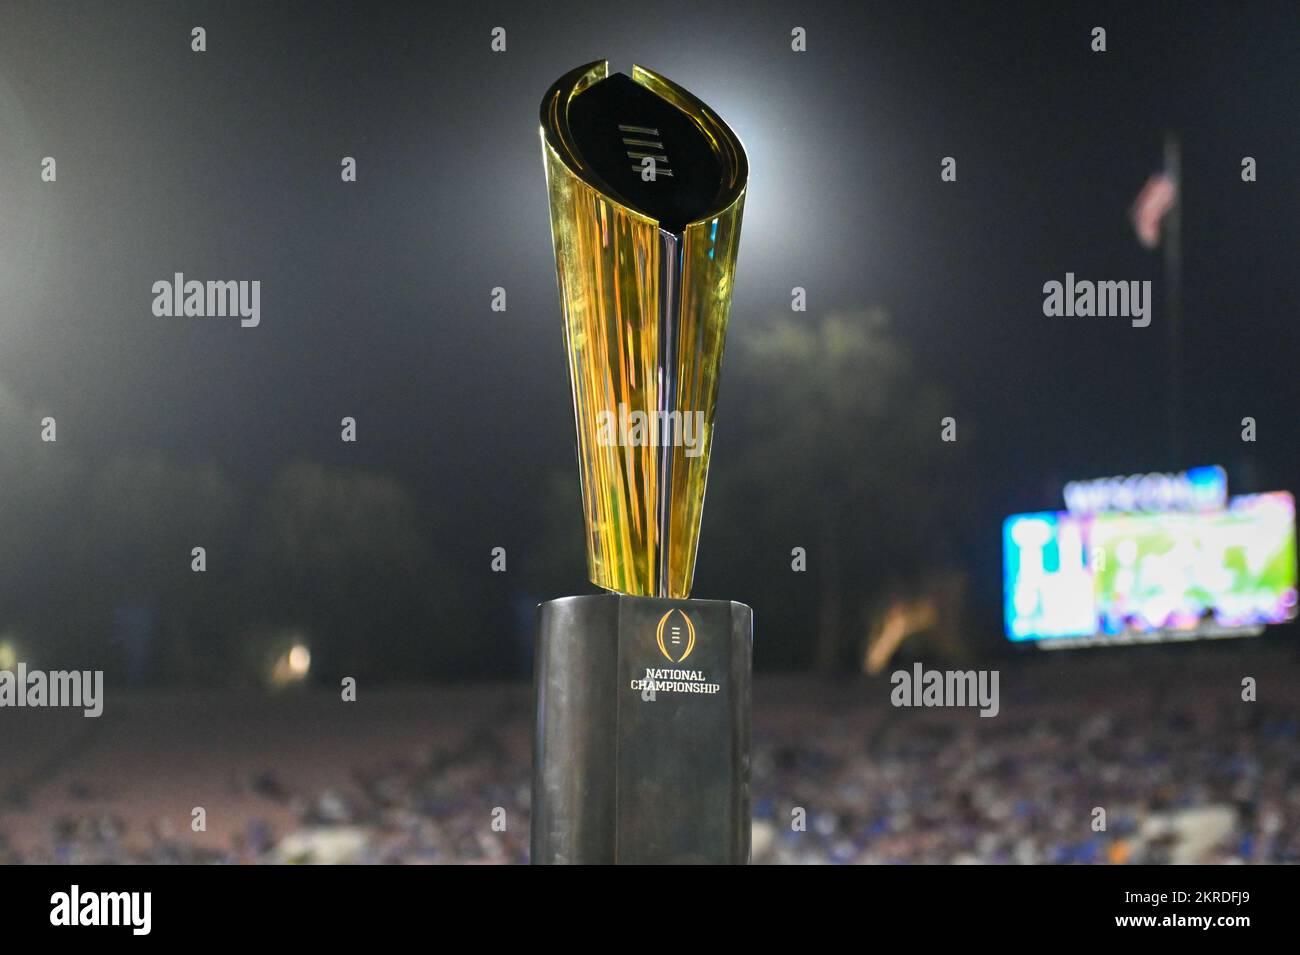 The College Football Playoff National Championship trophy sits on the sideline during an NCAA football game between the UCLA Bruins and the Washington Stock Photo